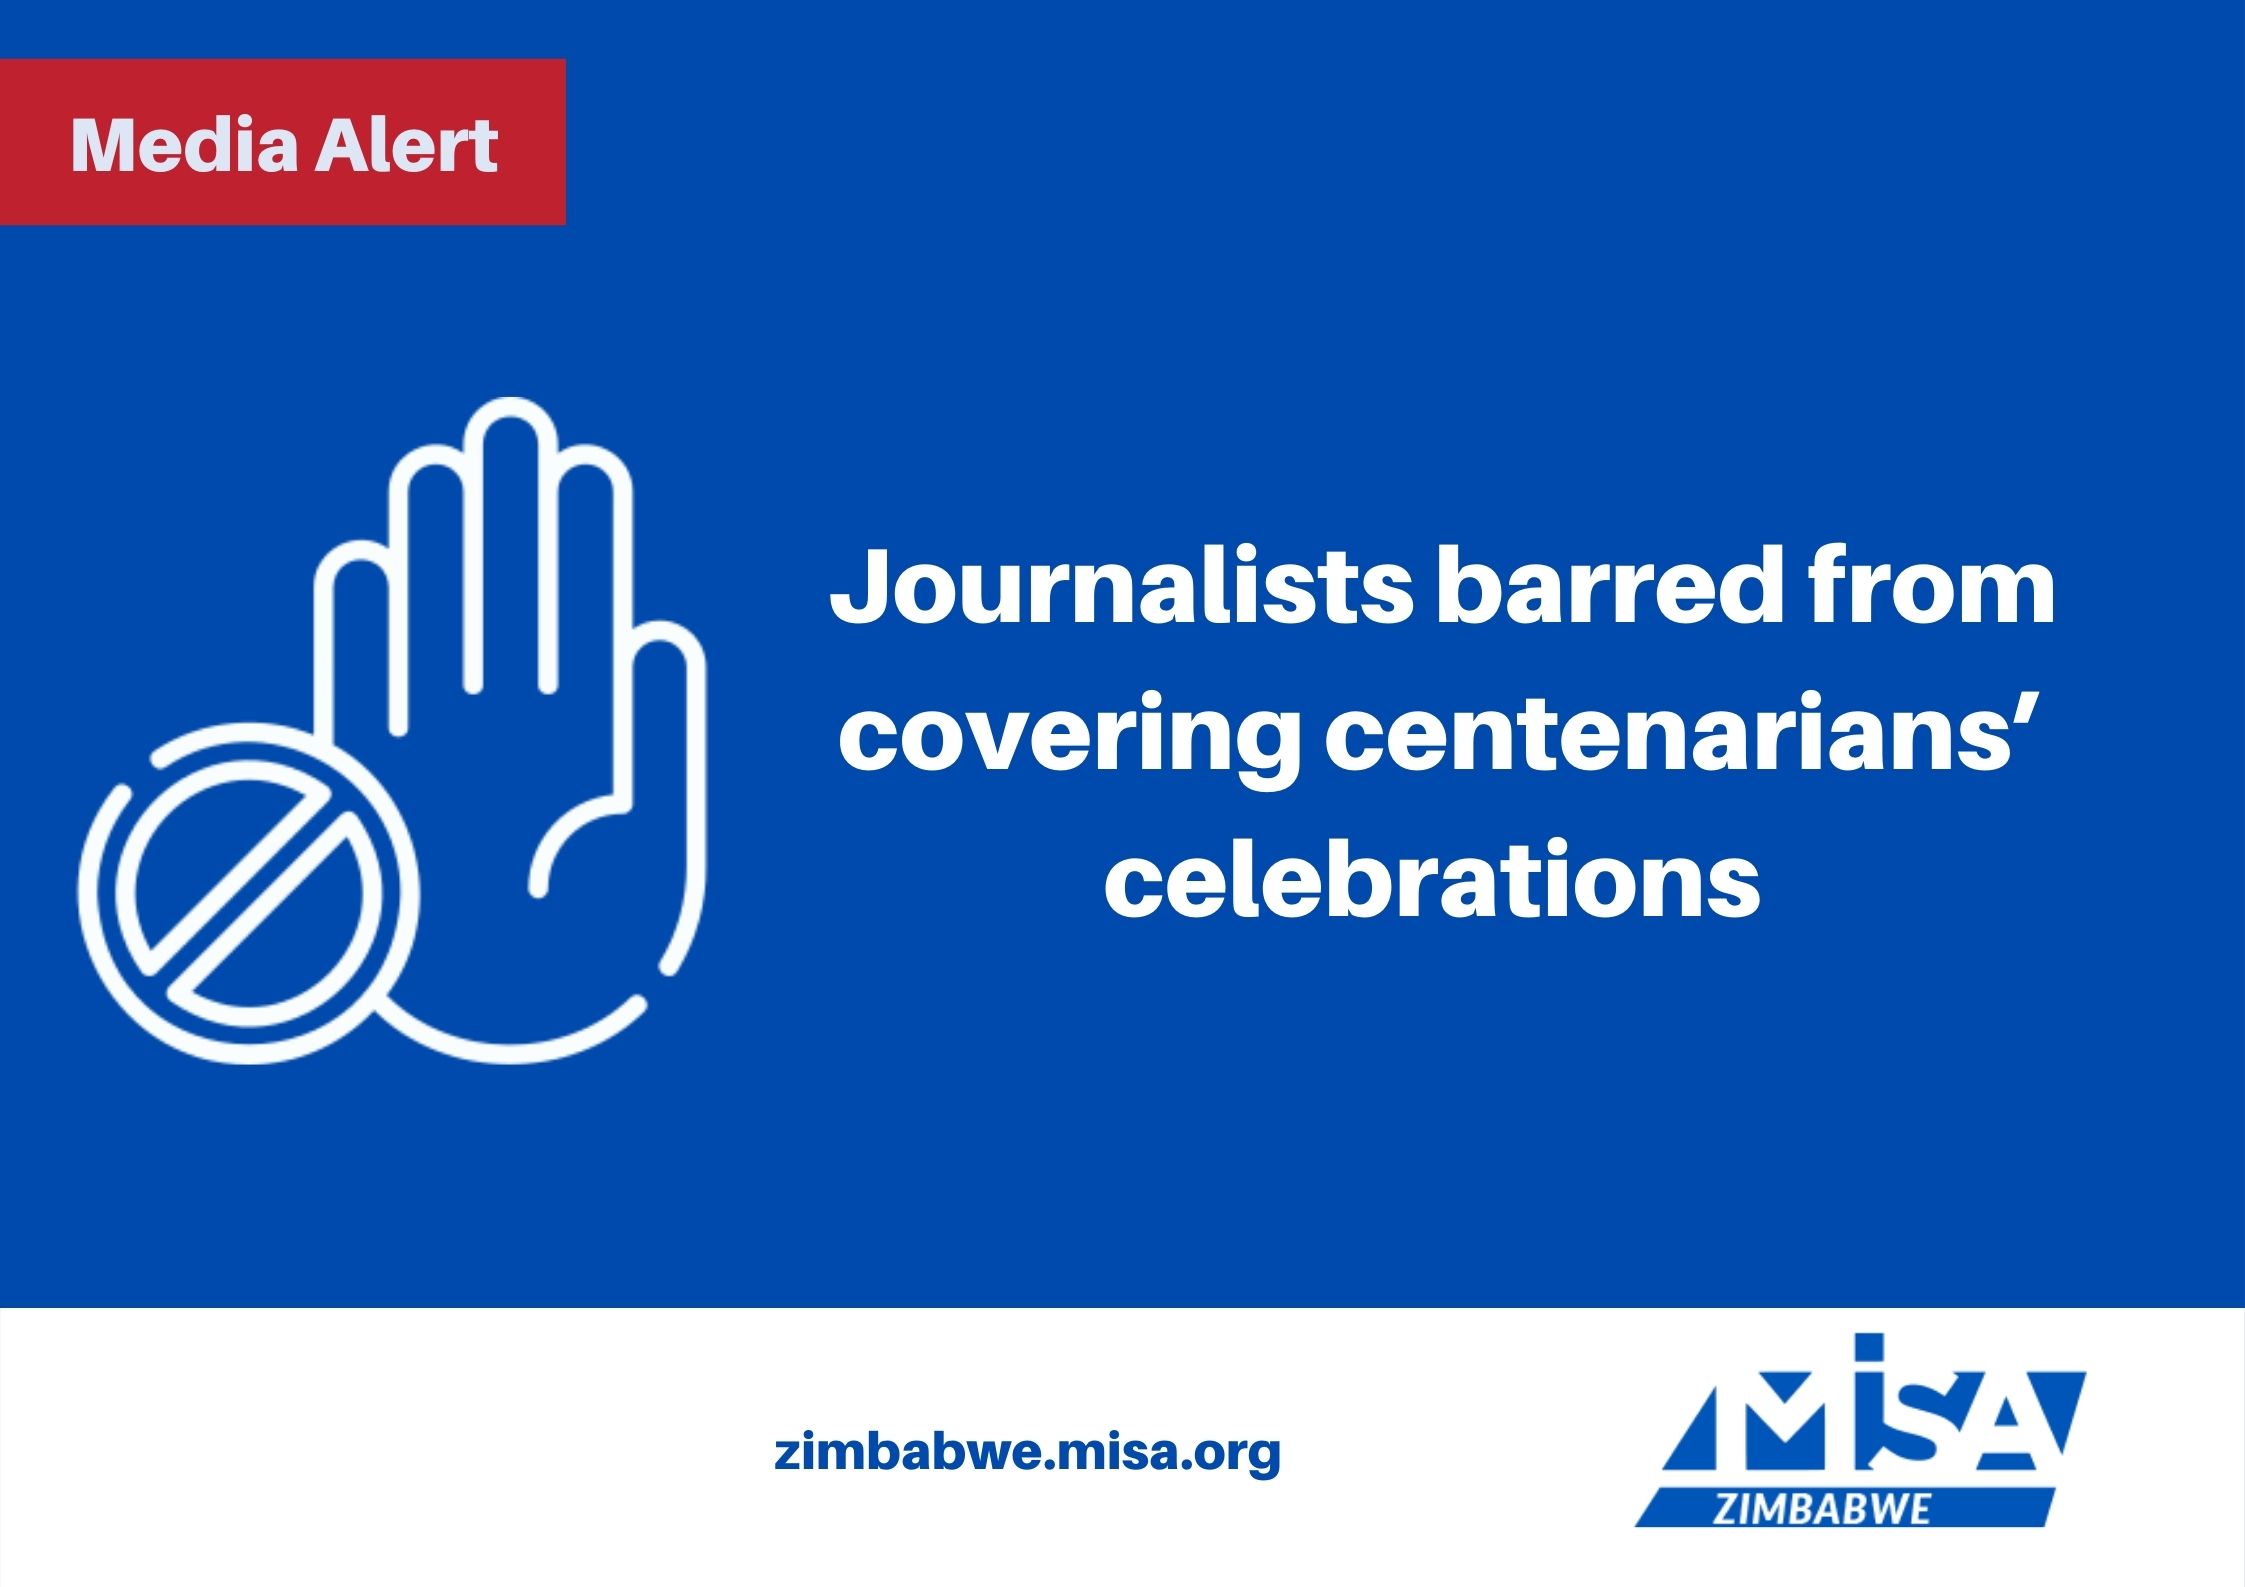 Journalists barred from covering centenarians’ celebrations